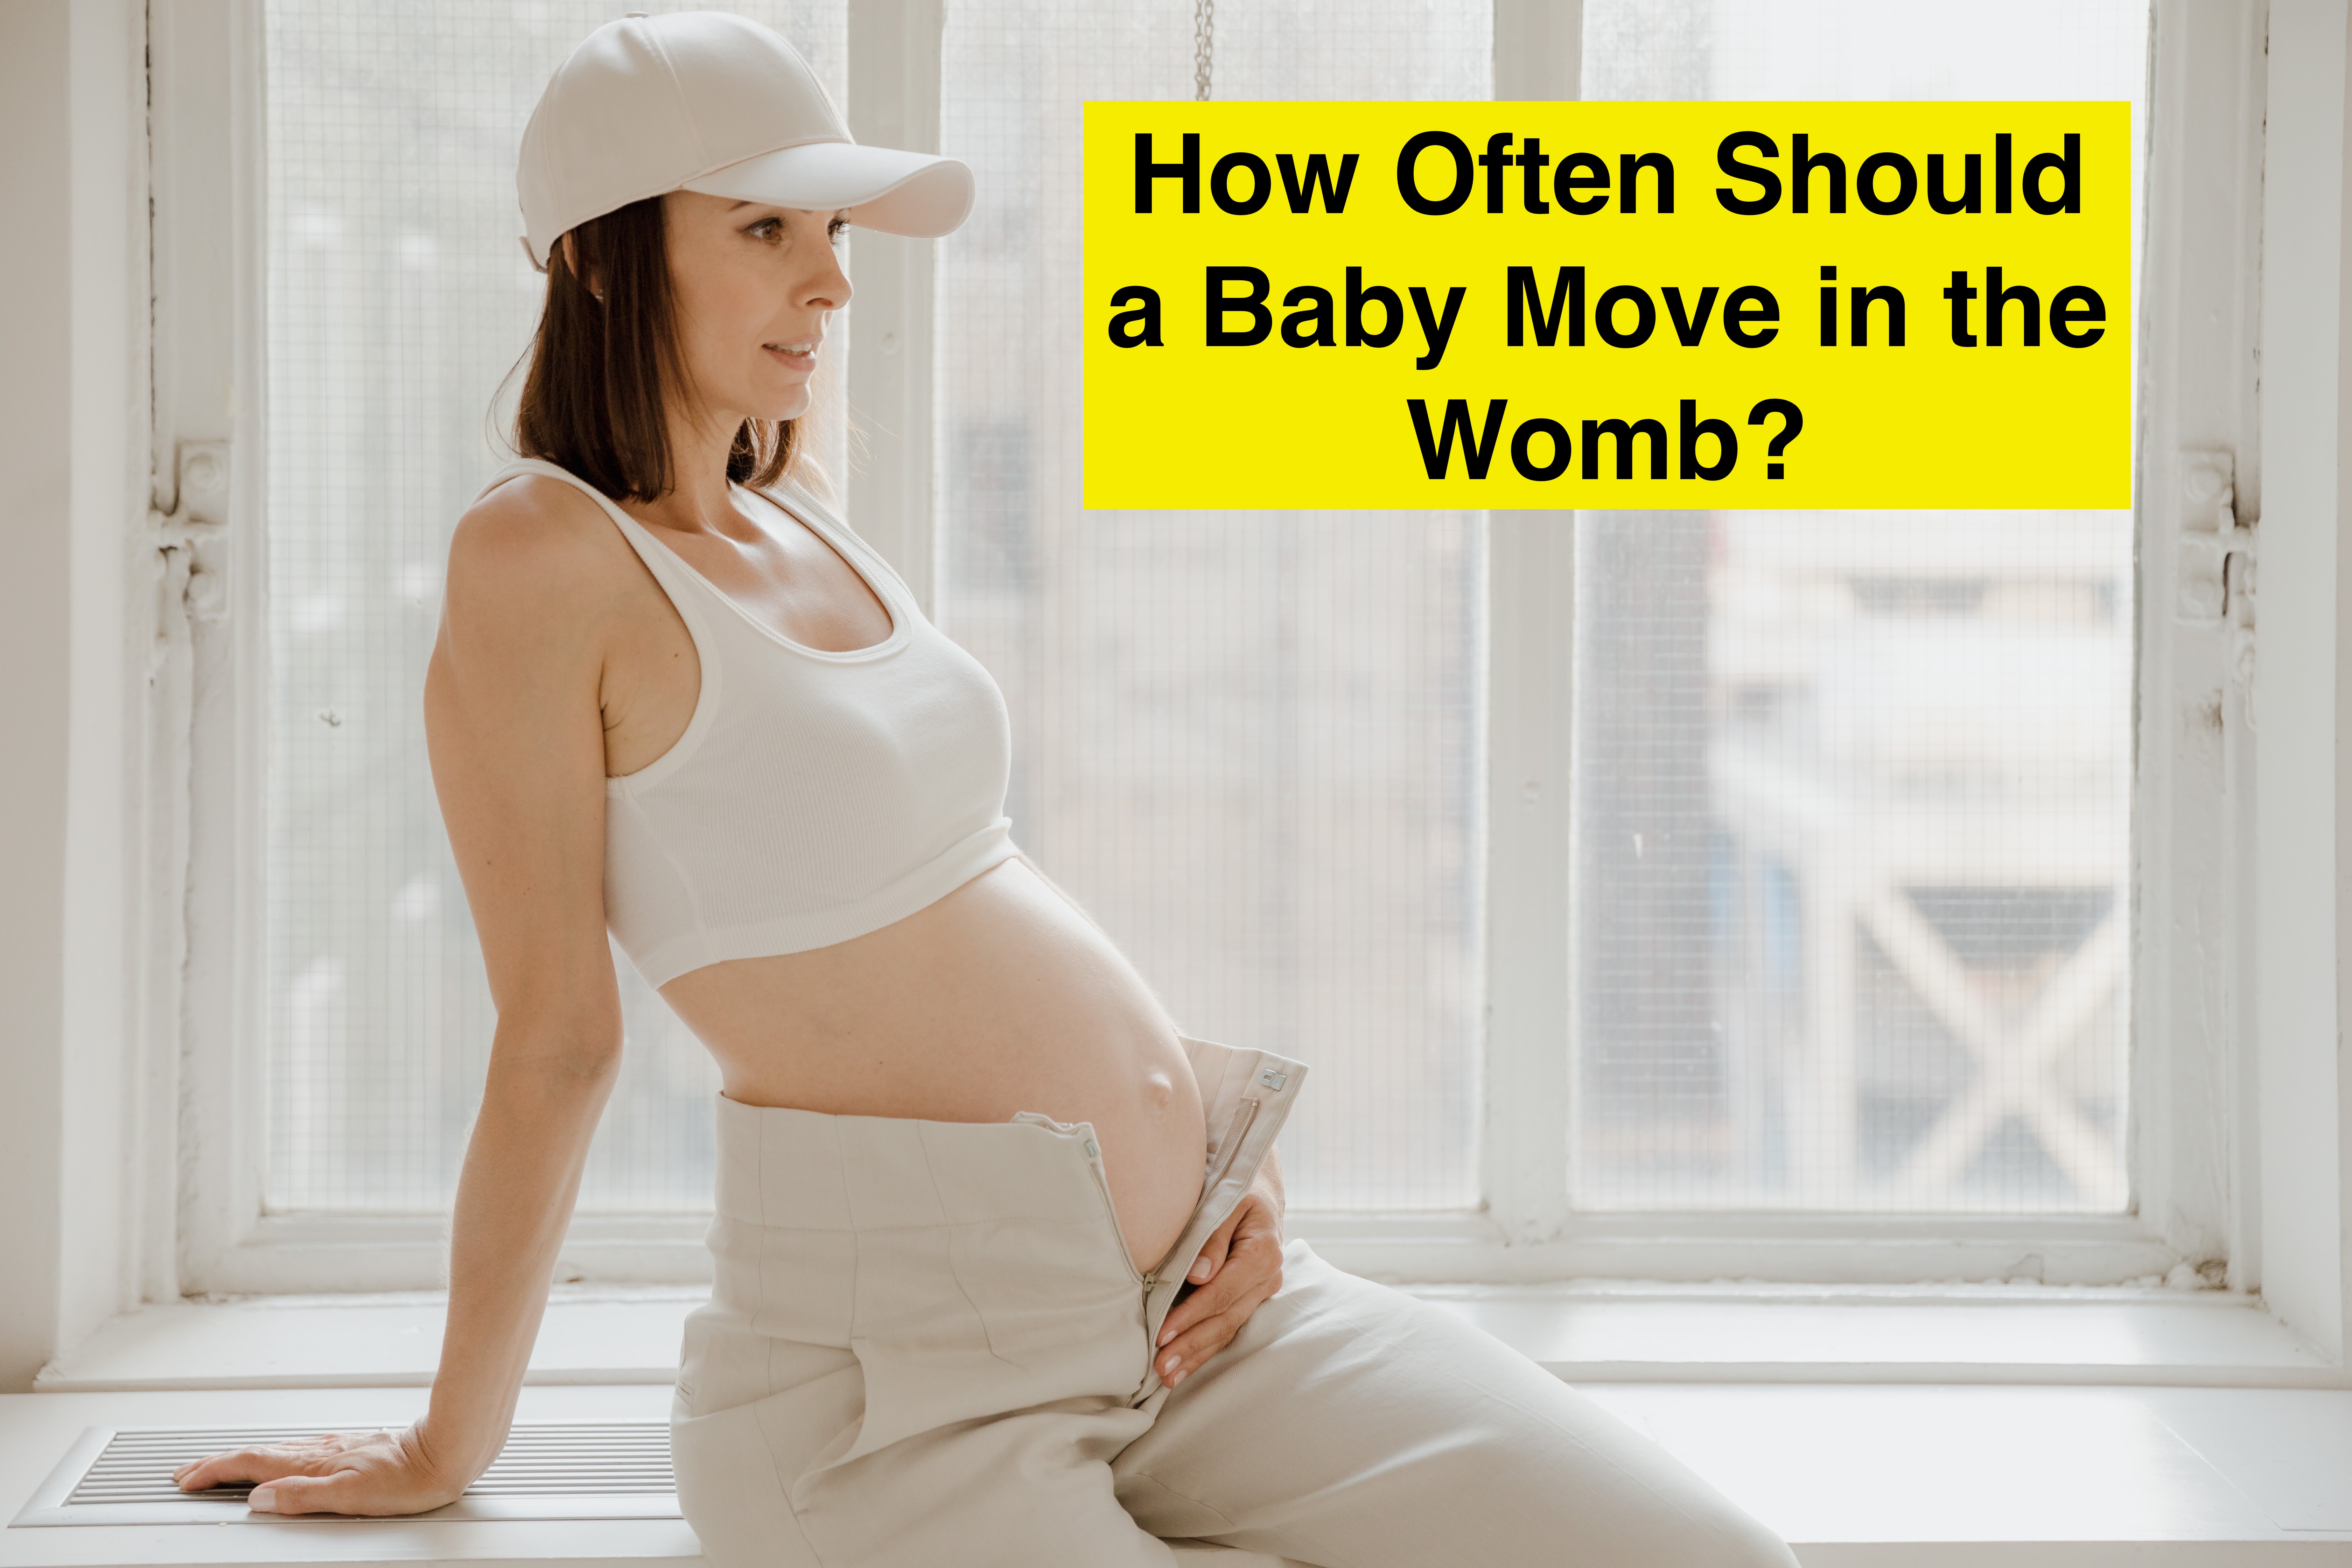 How Often Should a Baby Move in the Womb?